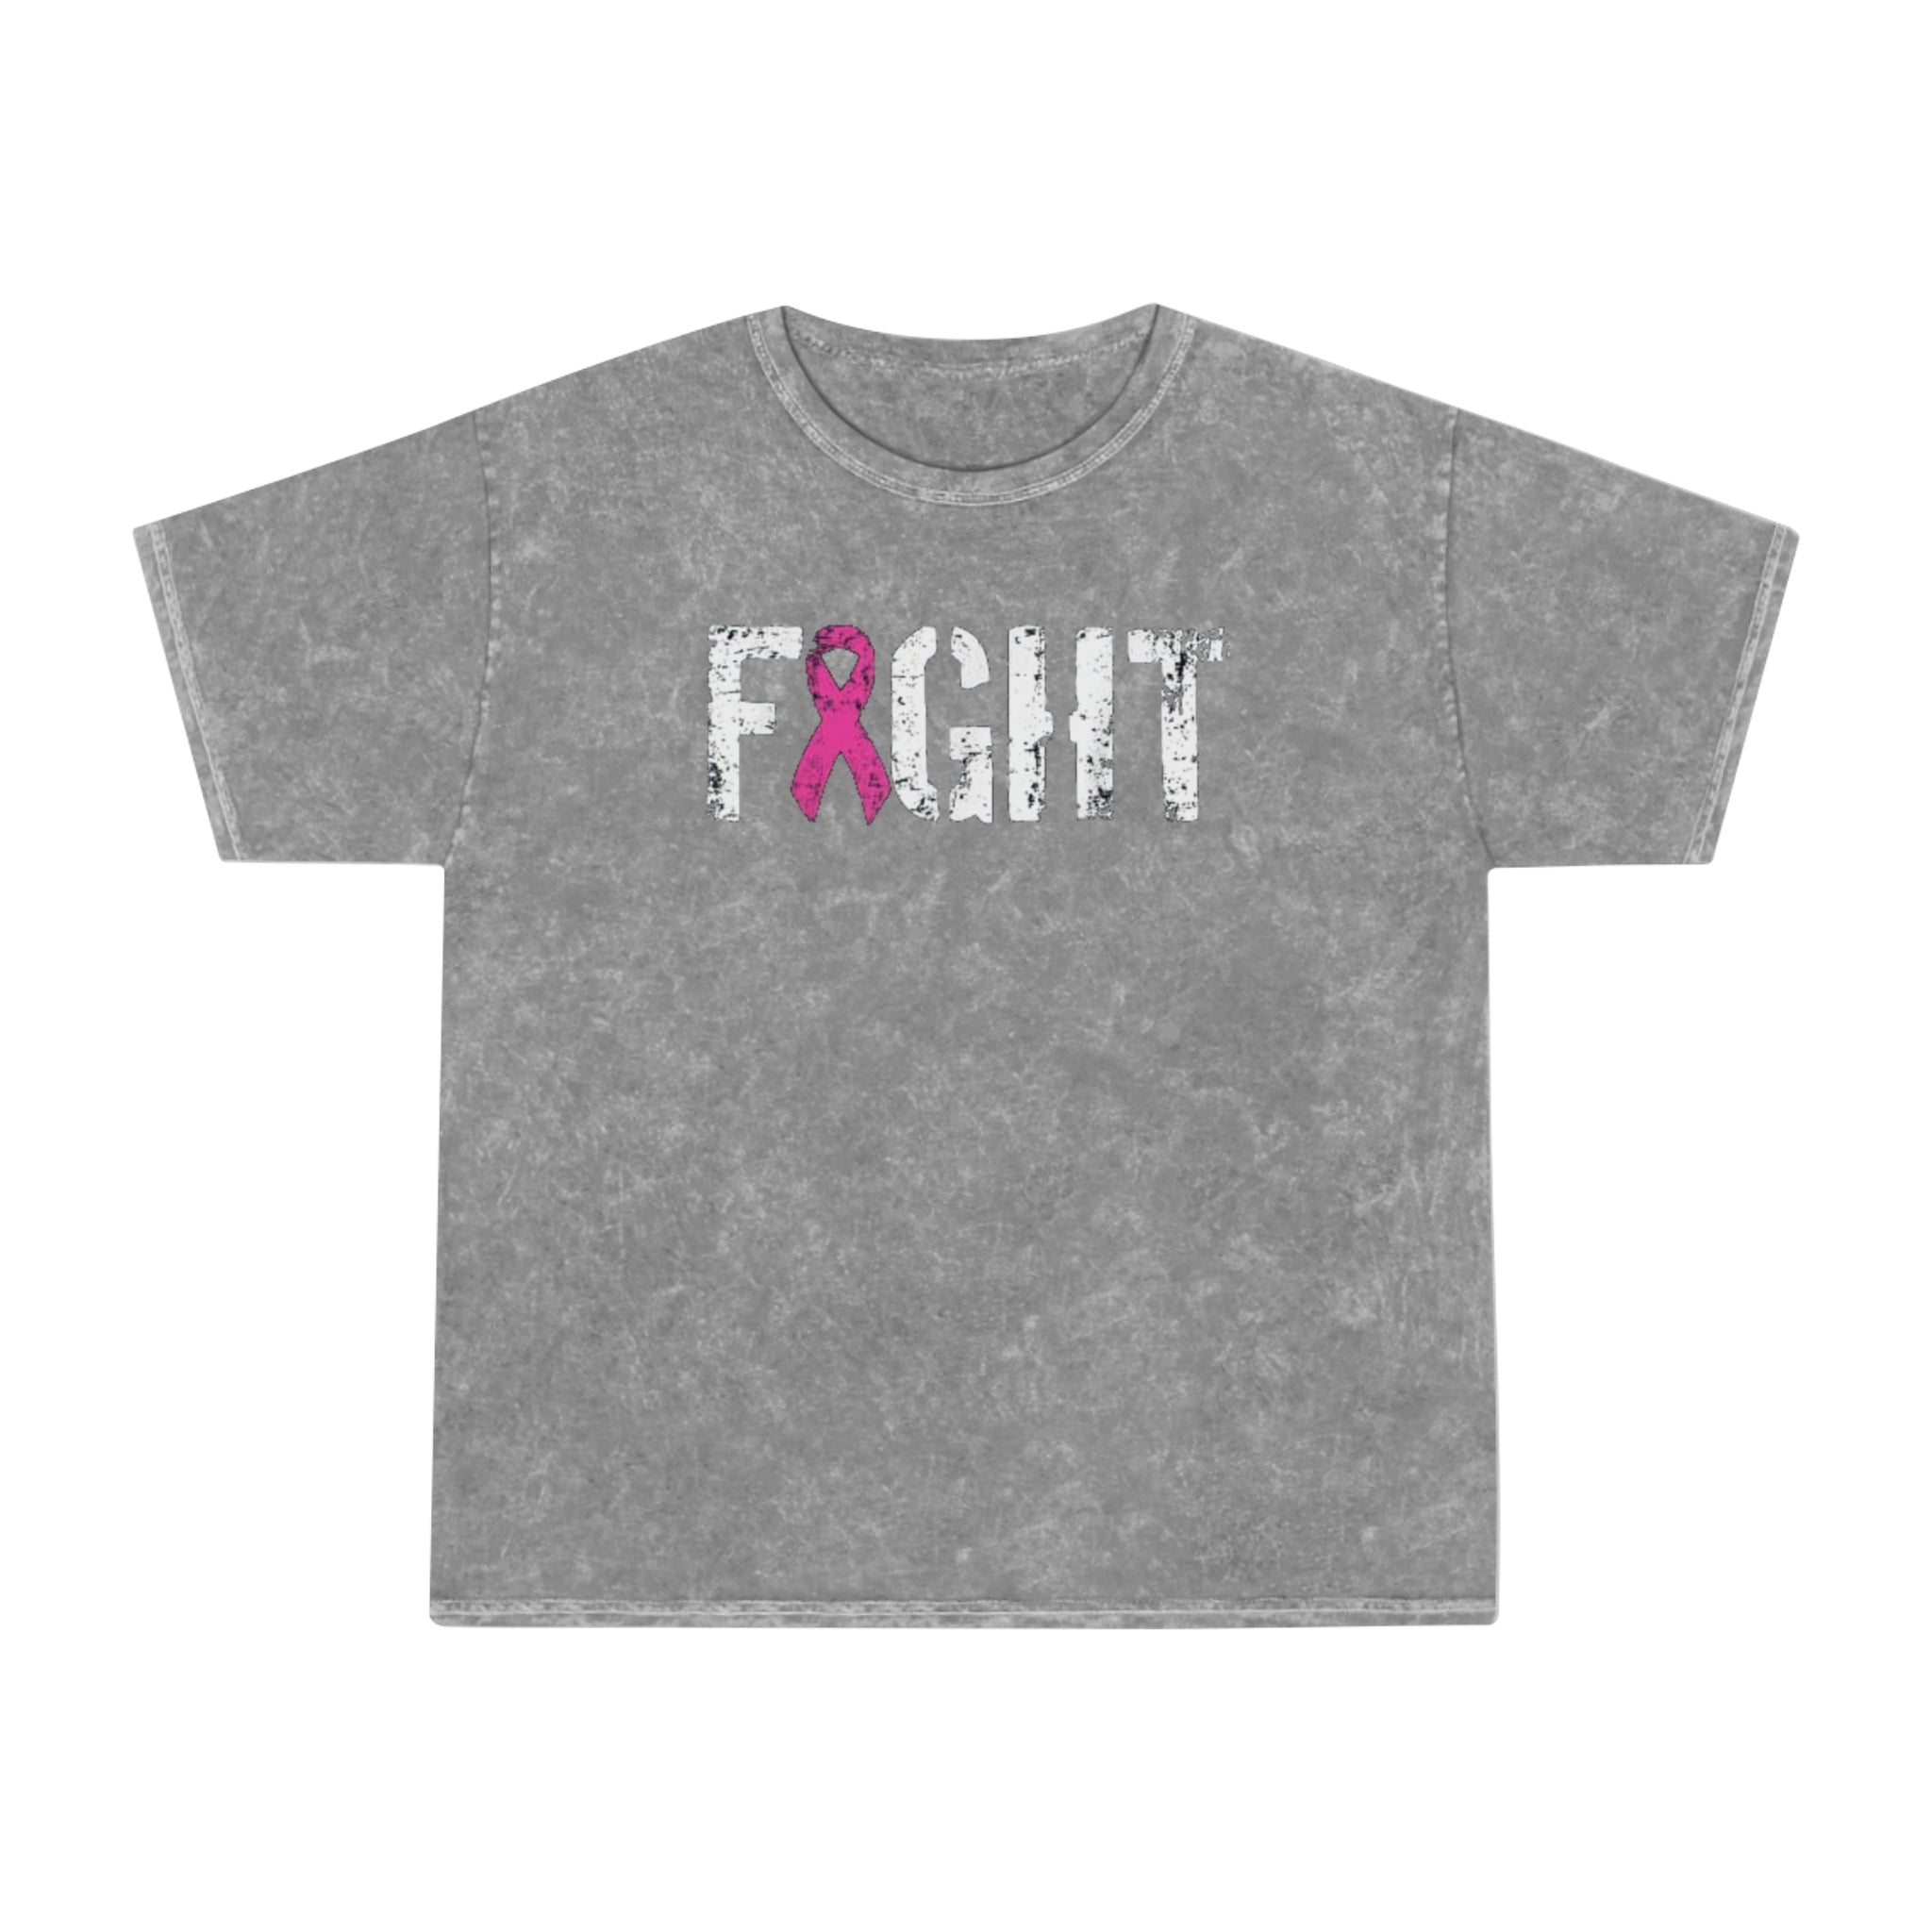 Unisex Mineral Wash T-Shirt - "Fight" Breast Cancer Awareness